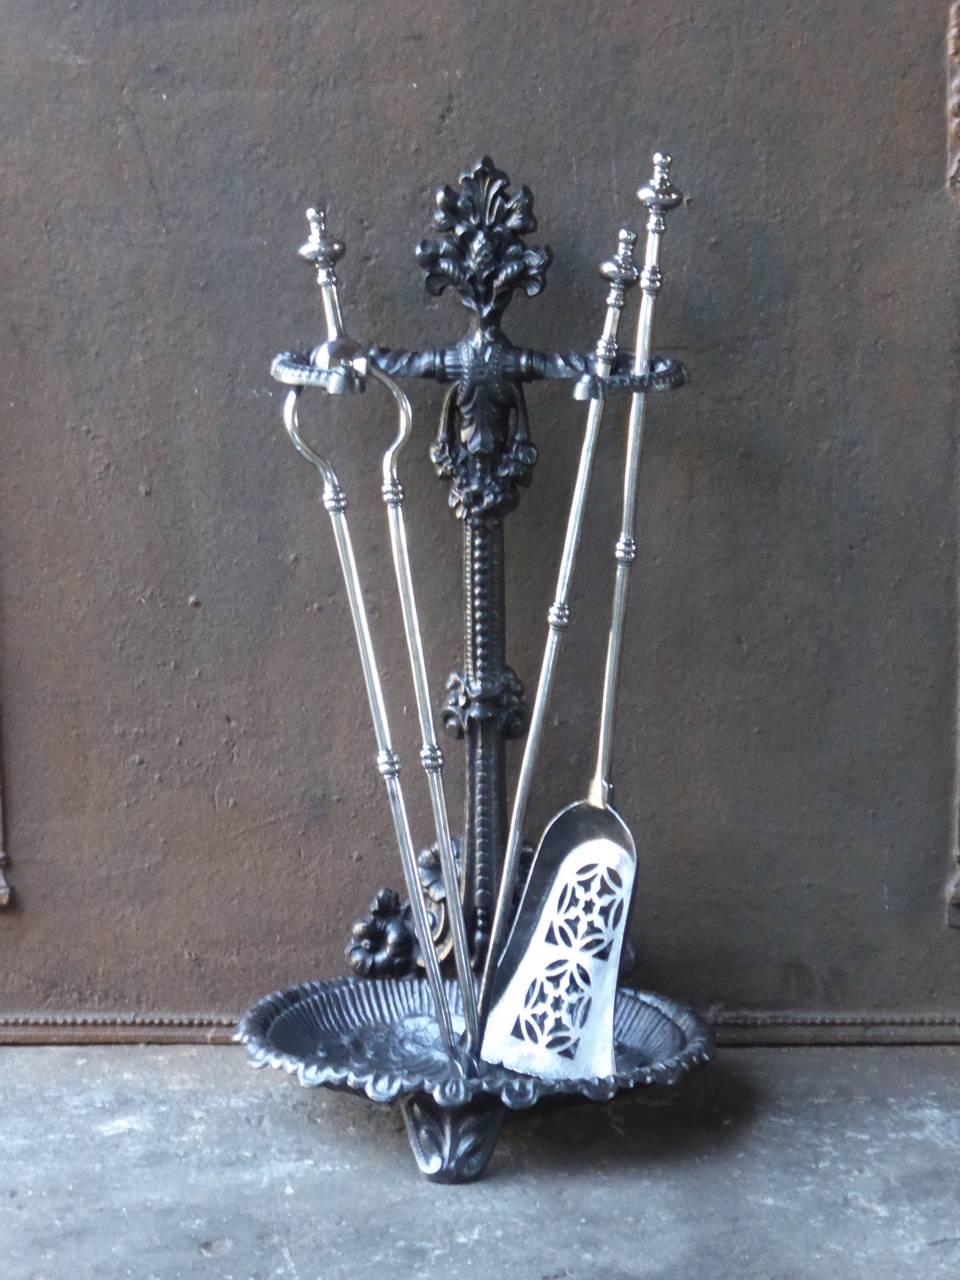 19th century English fireplace toolset made of cast iron and polished steel.

We have a unique and specialized collection of antique and used fireplace accessories consisting of more than 1000 listings at 1stdibs. Amongst others, we always have 500+